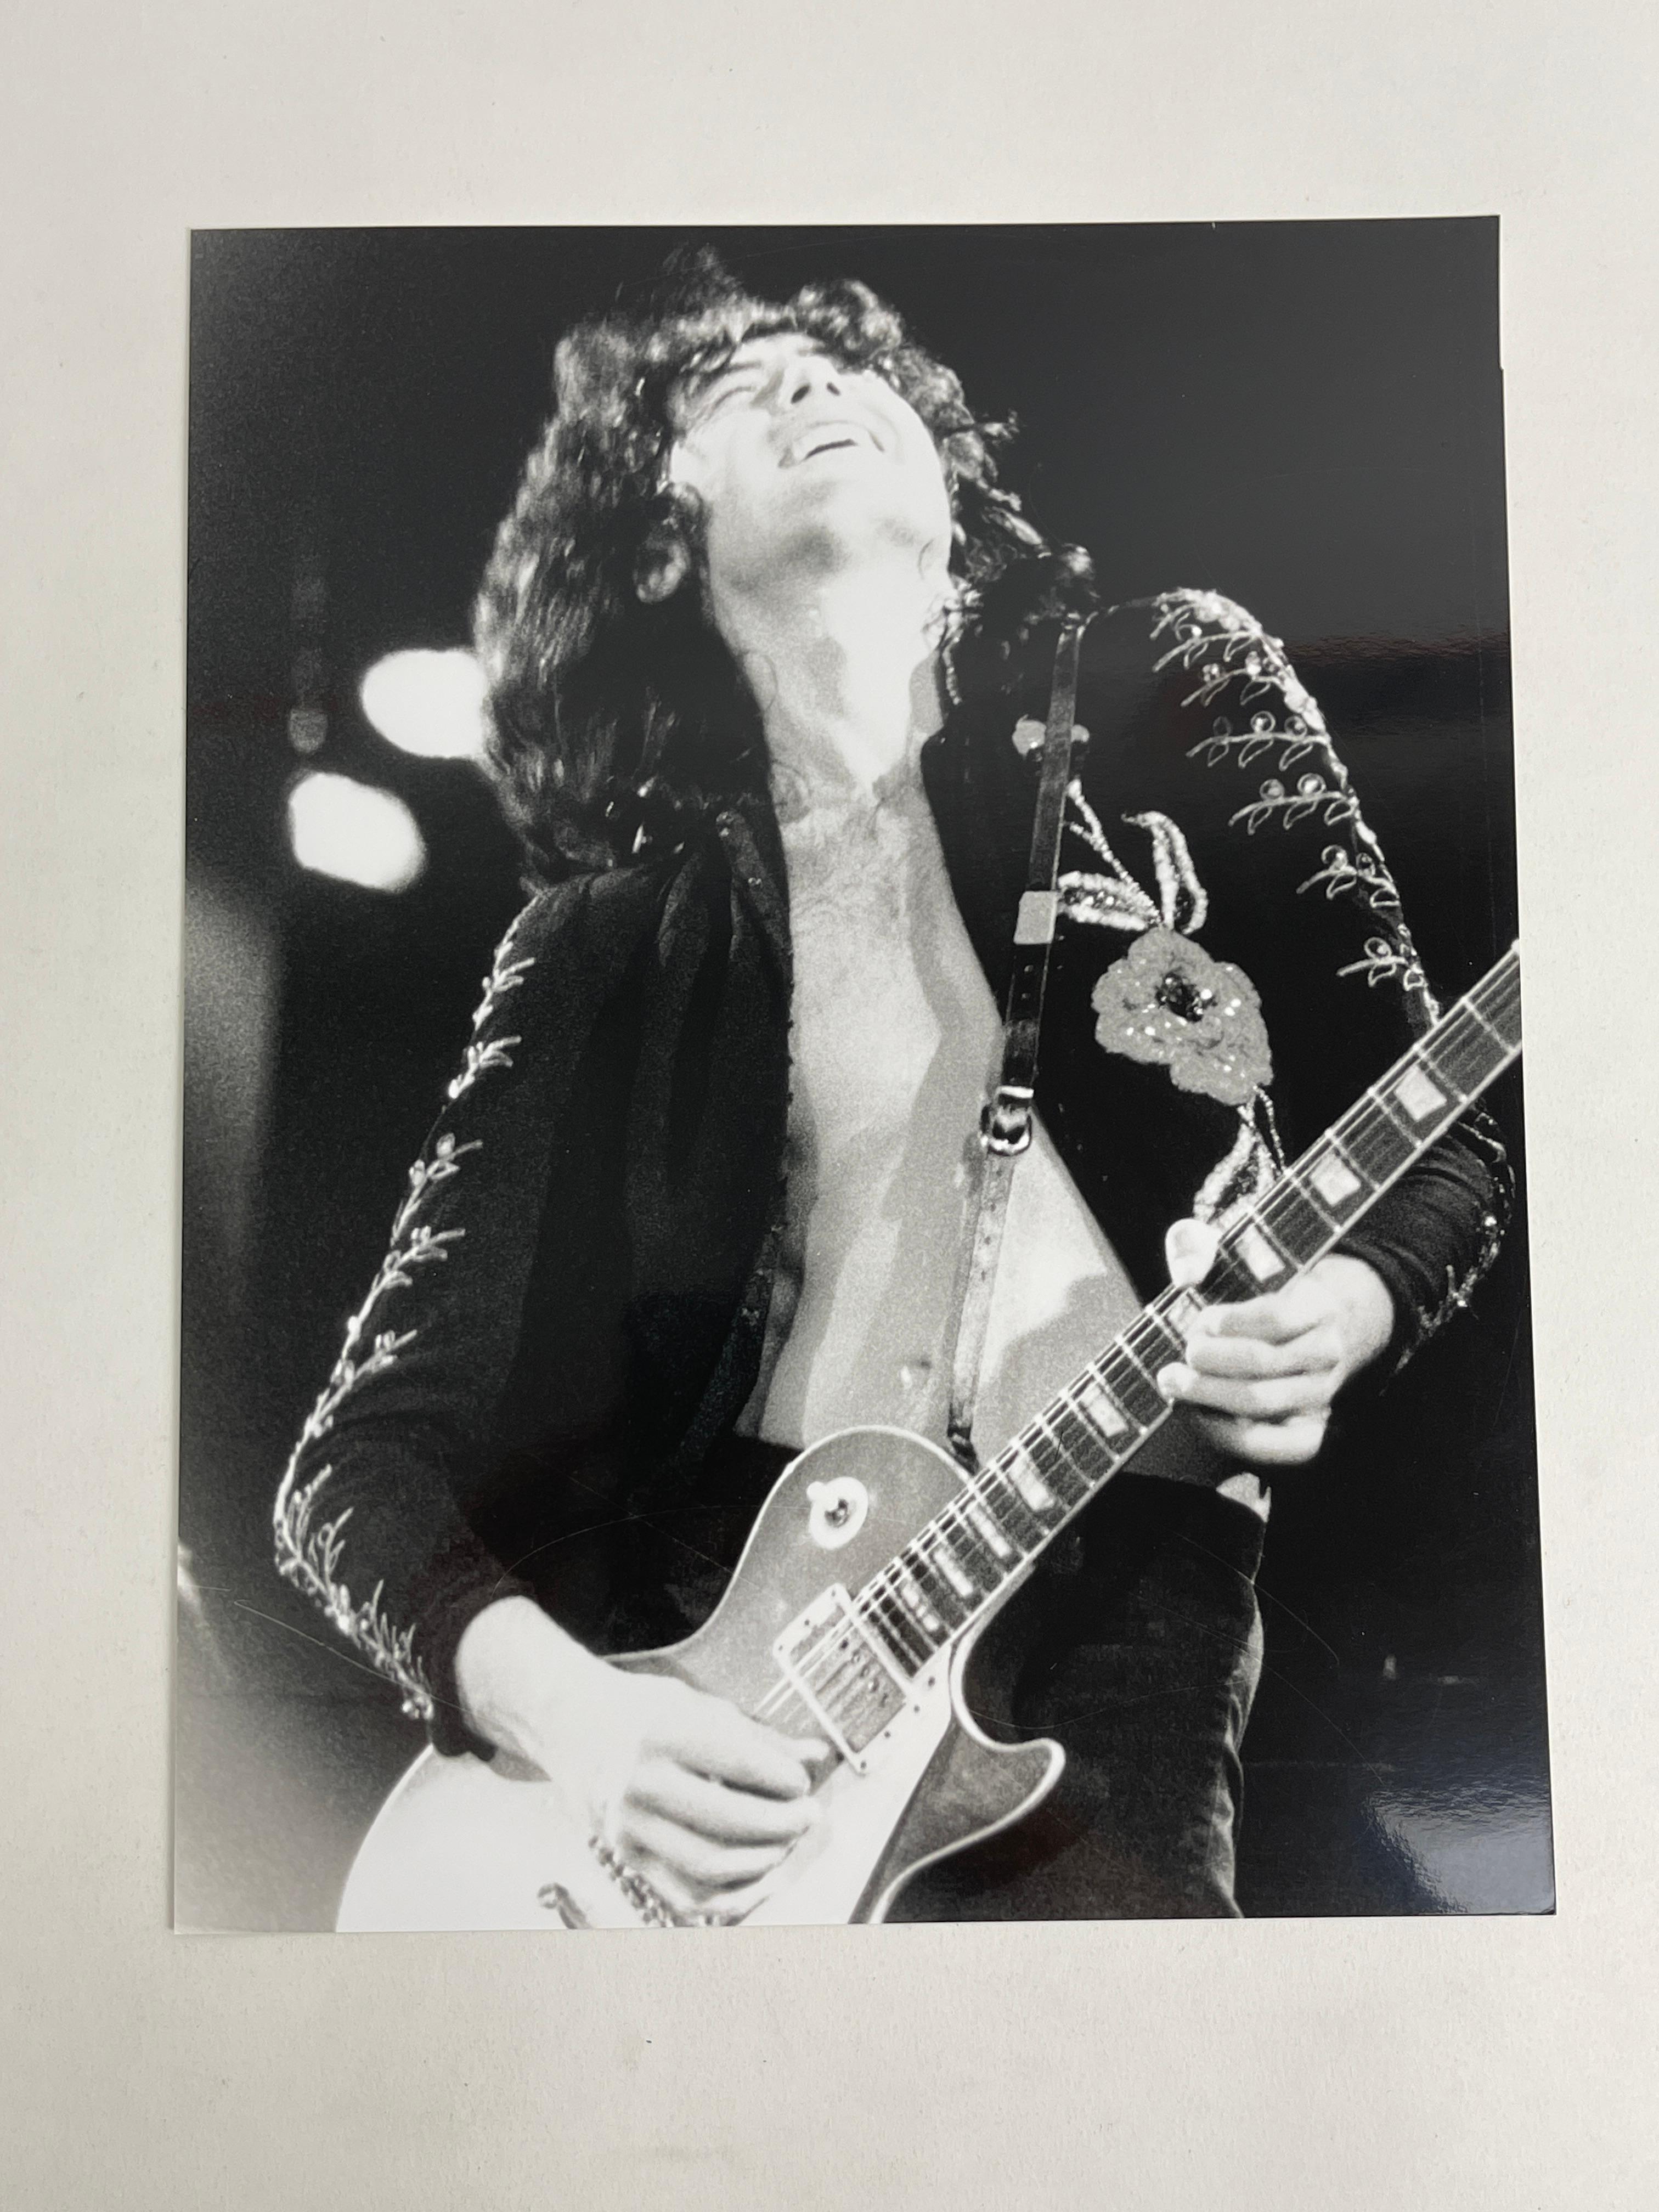 ORIGINAL BLACK AND WHITE PHOTOGRAPHY JIMMY PAGE LED ZEPPELIN